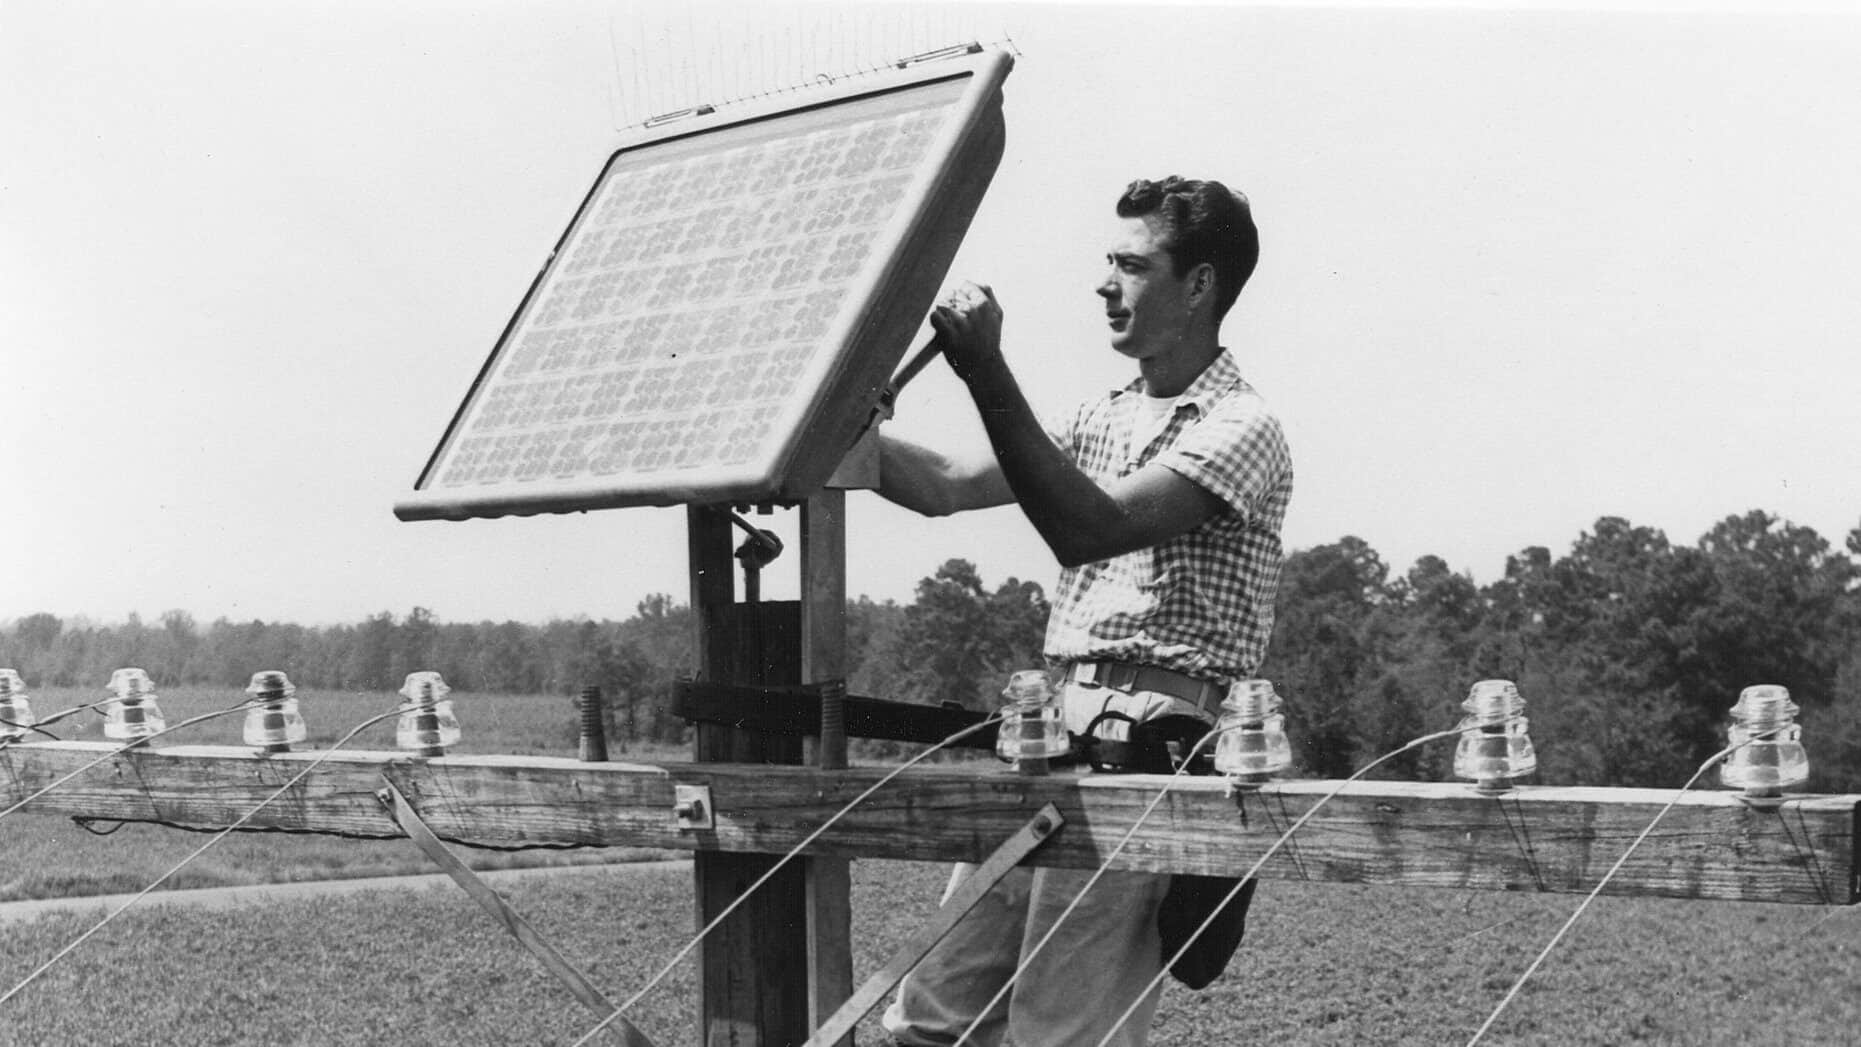 Early solar panels on telephone poles, a big step forward in solar history.